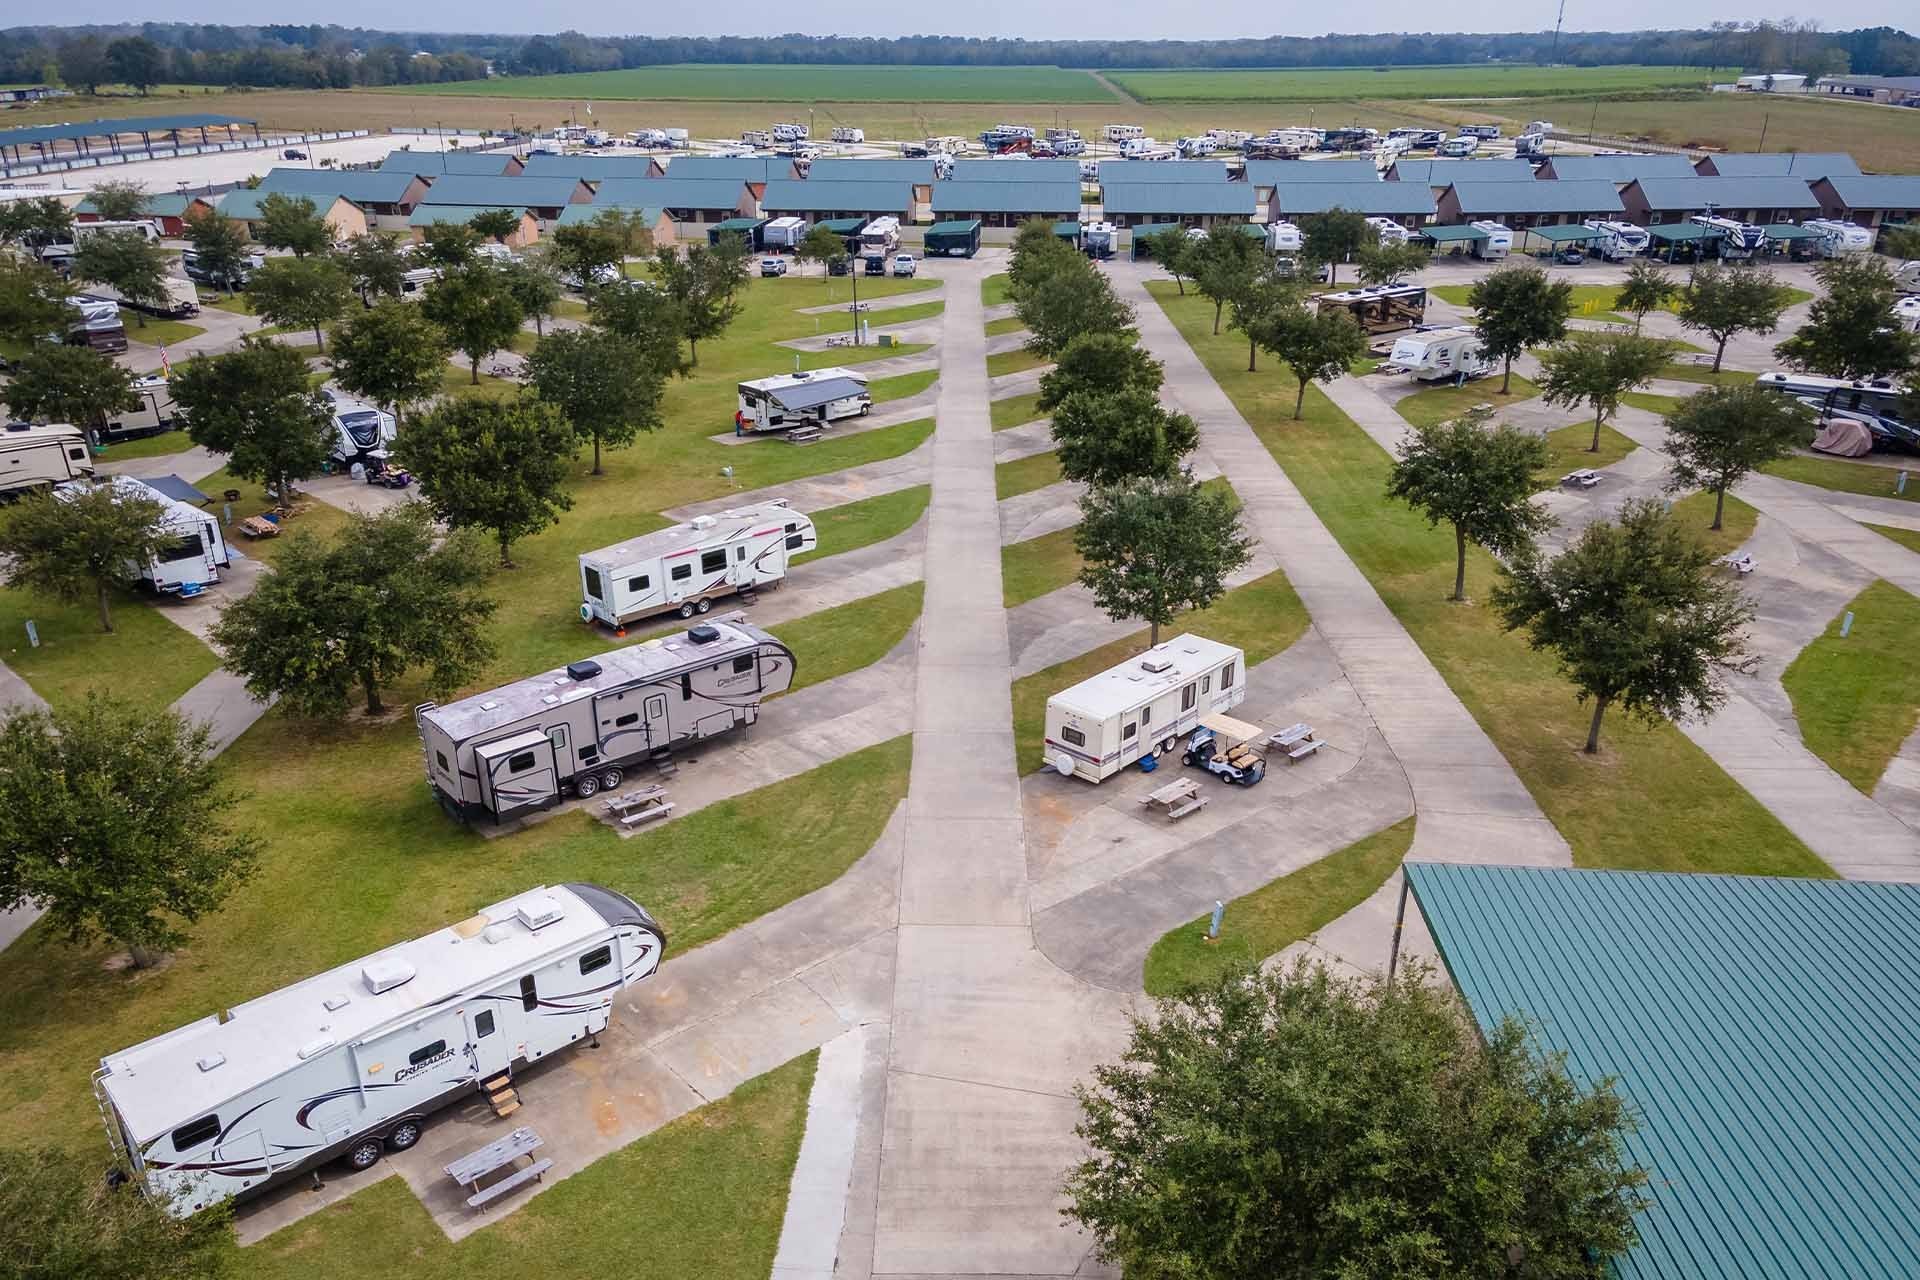 Top Campgrounds in Saint Landry, Louisiana